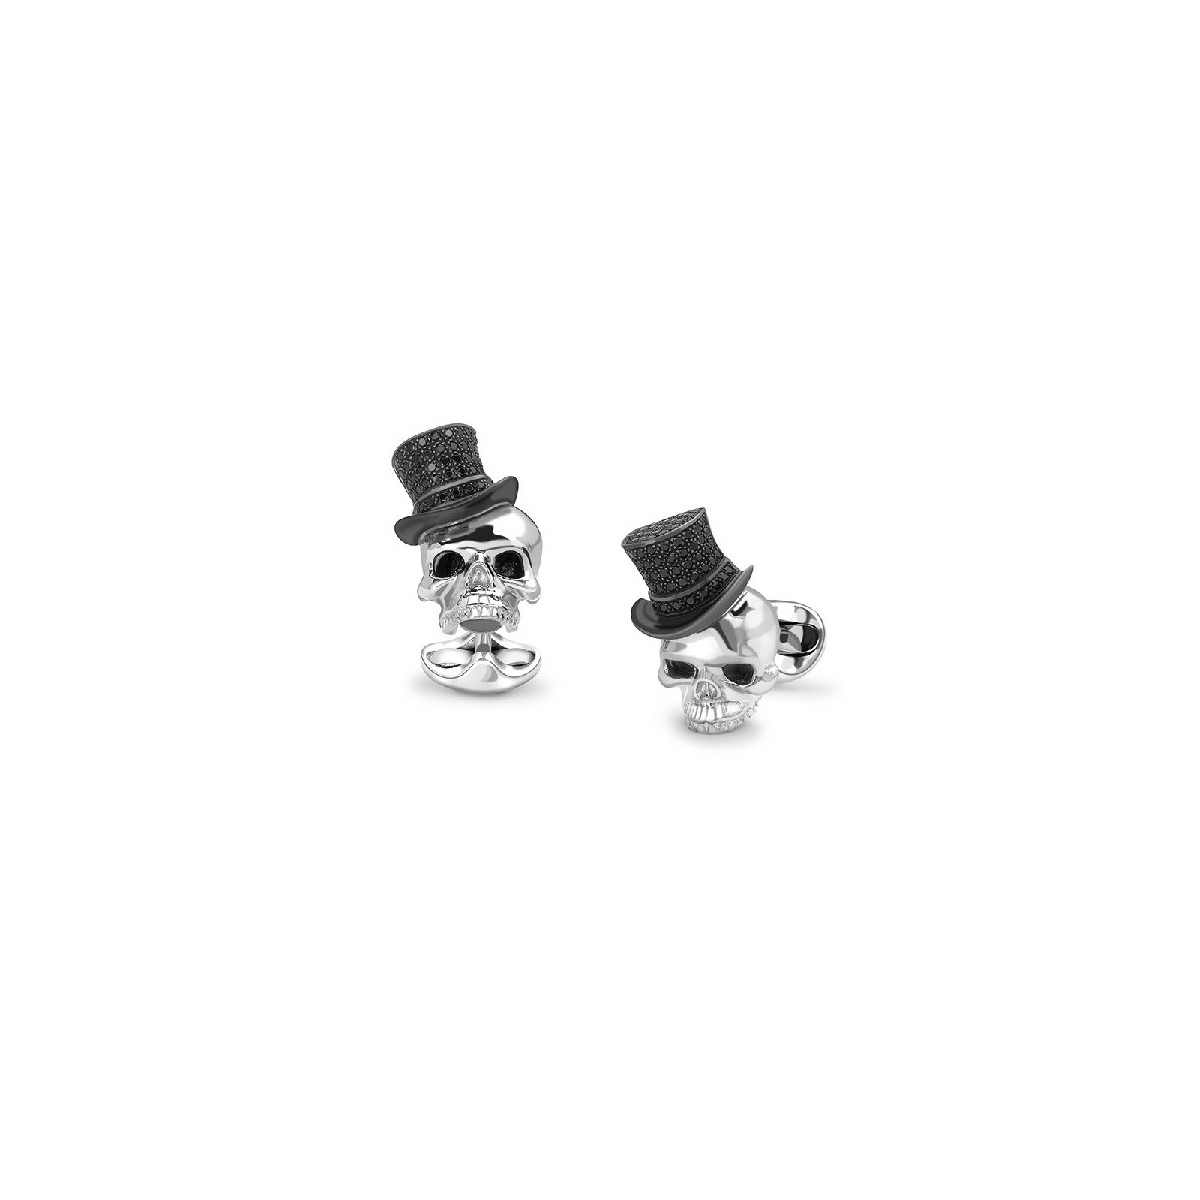 STERLING SILVER SKULL CUFFLINKS WITH BLACK SPINEL TOP HATS C1673X0002